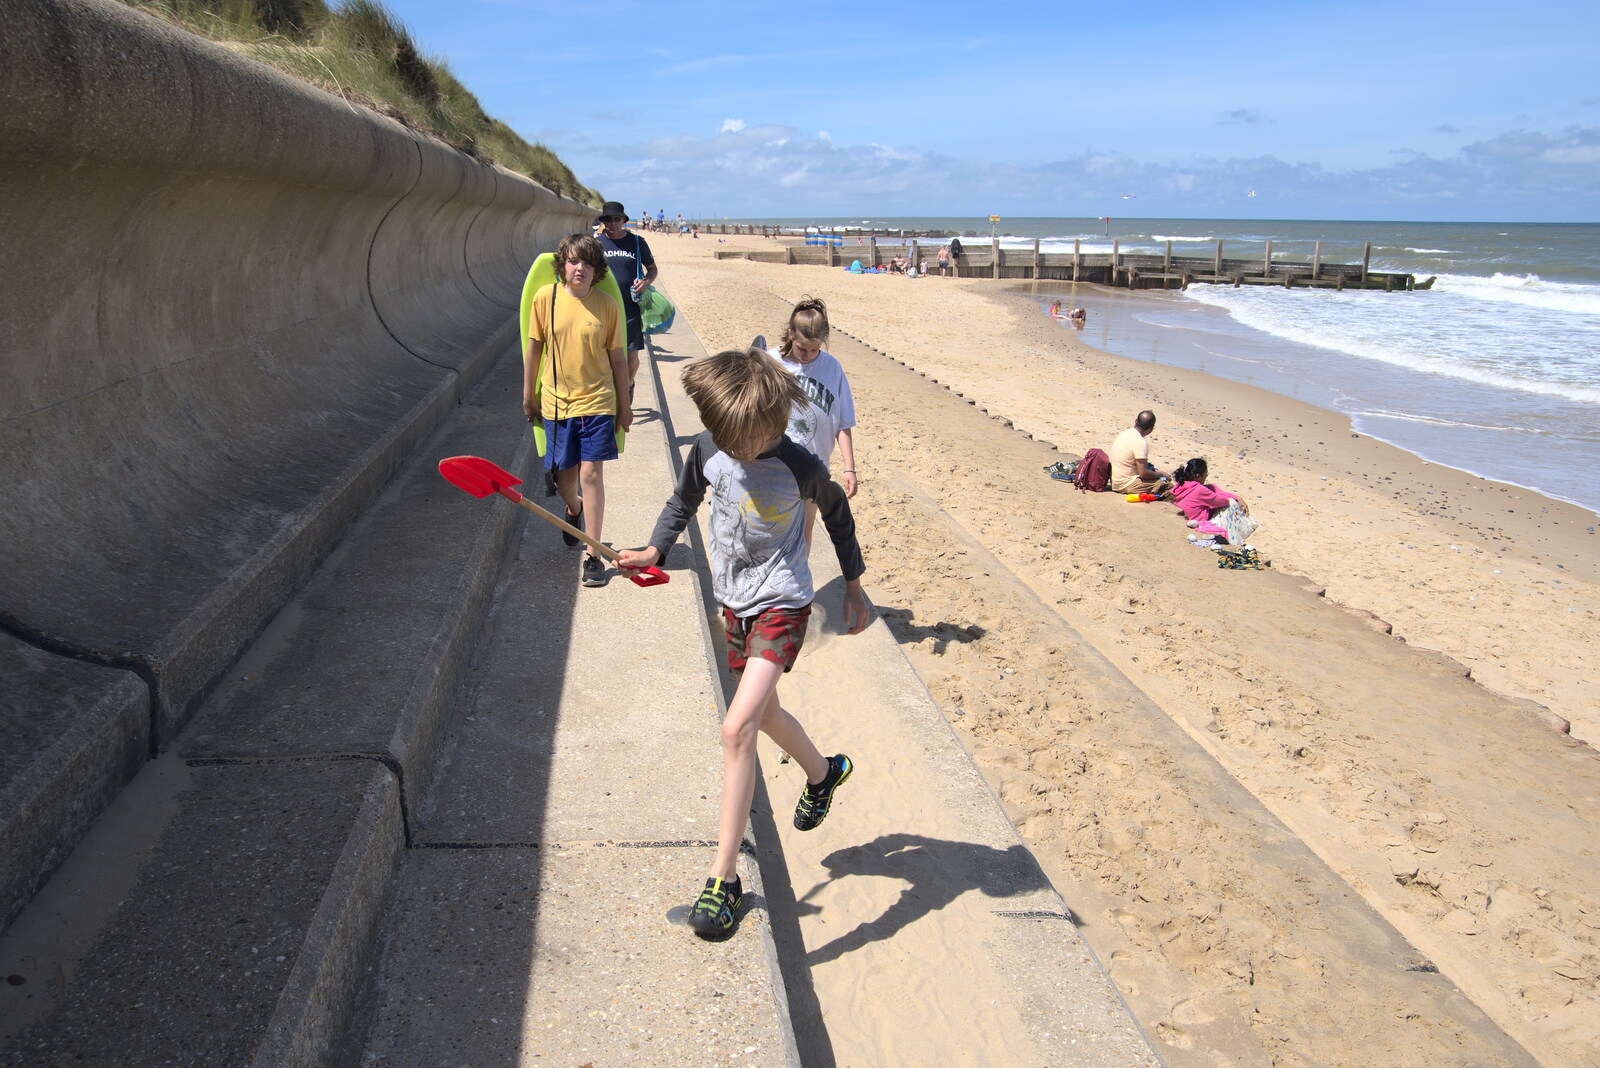 We head off along the sea wall from Camping in the Dunes, Waxham Sands, Norfolk - 9th July 2022